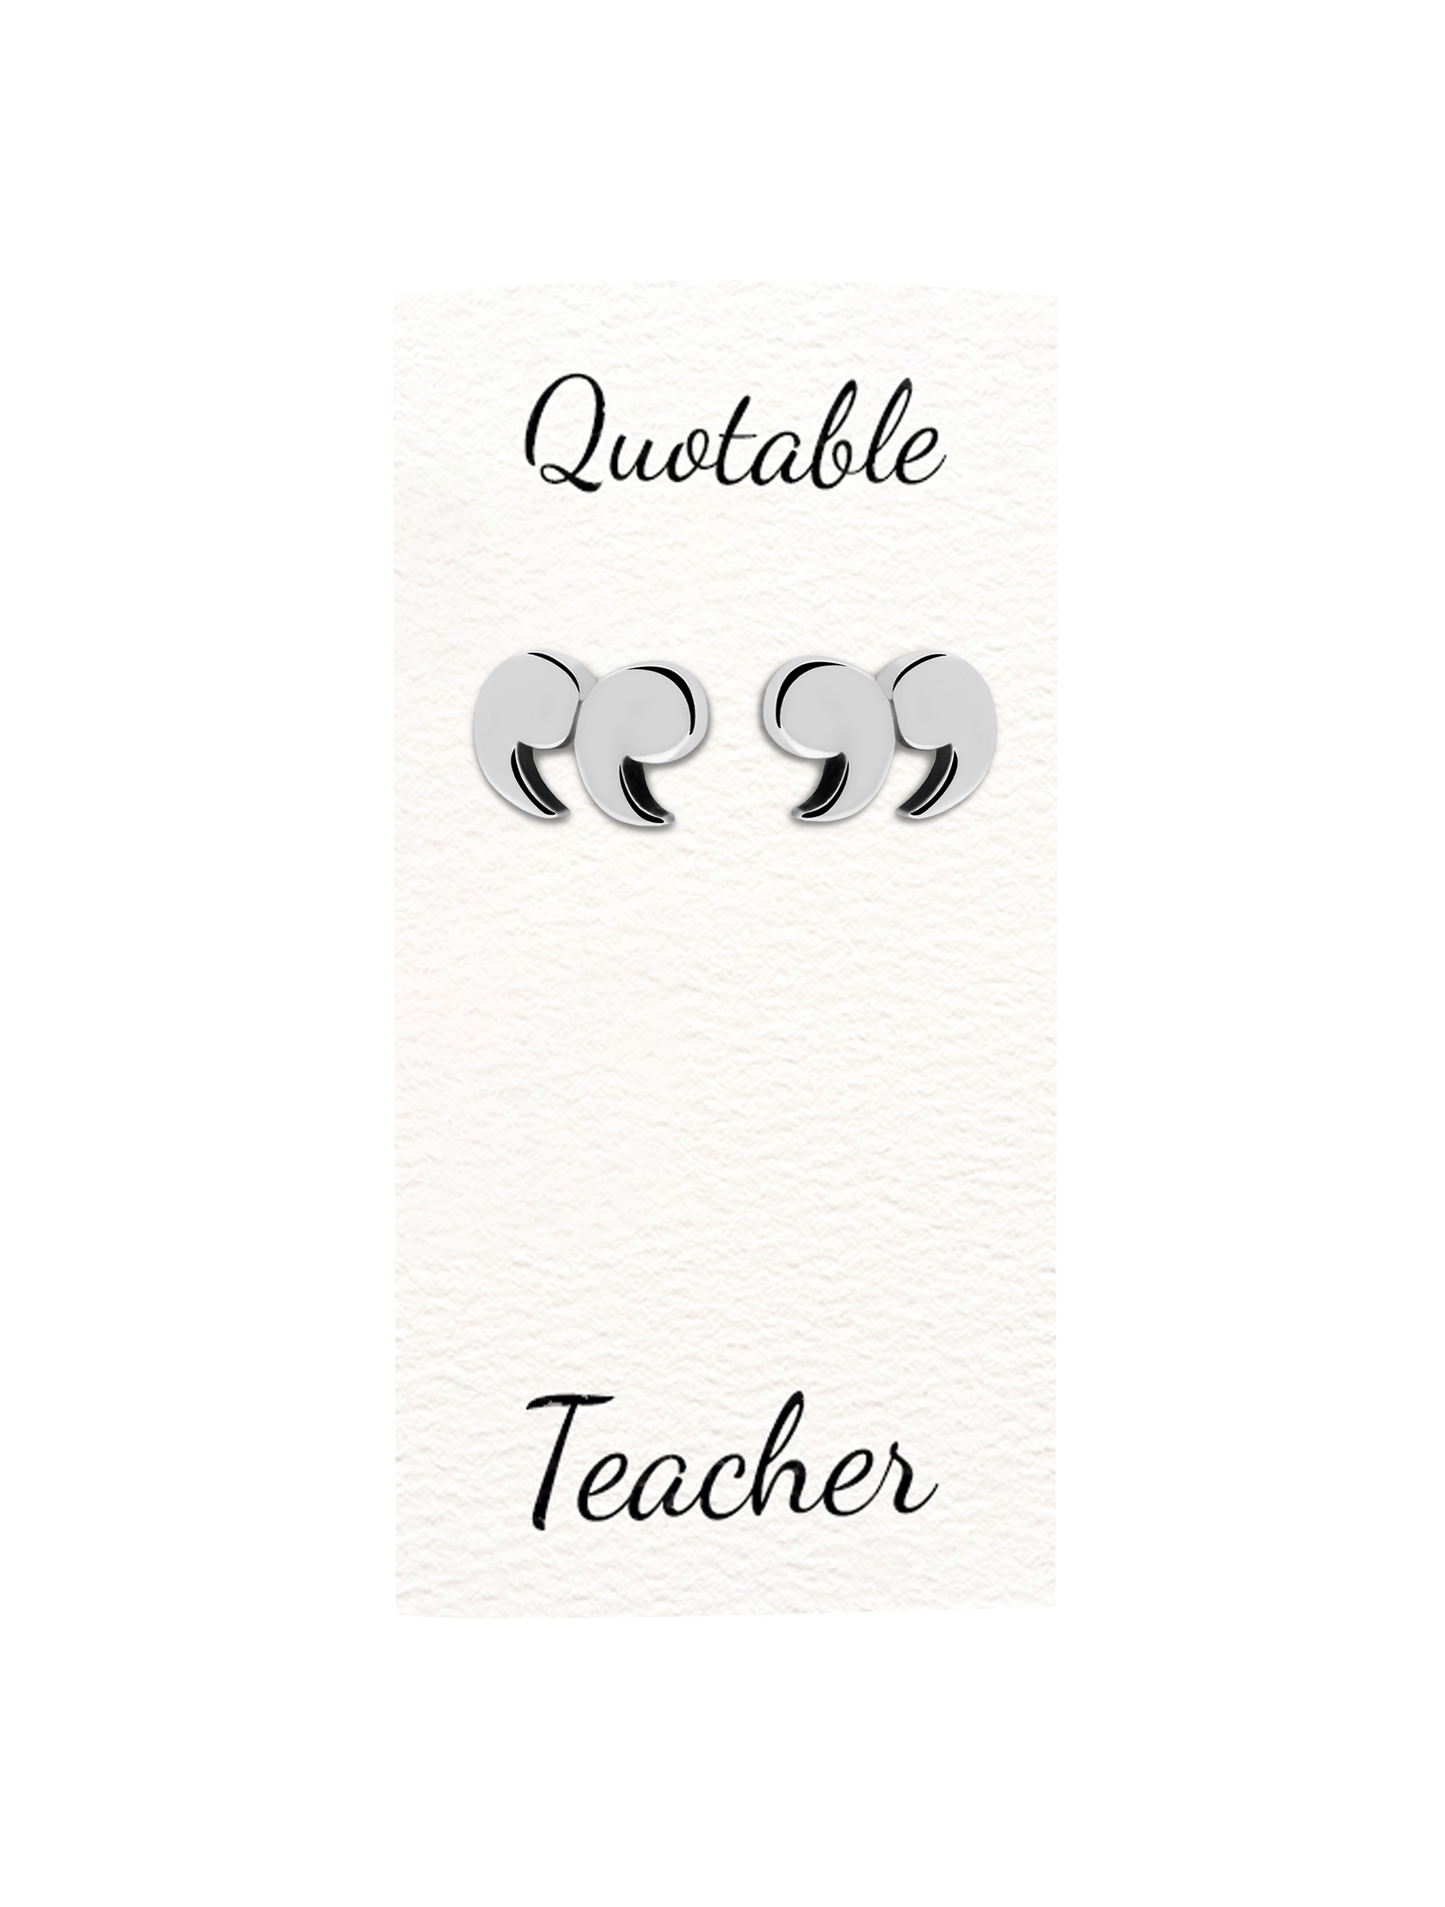 Quinnlyn & Co Silver Quotation Mark Stud Earrings, Appreciation Gift for Teachers, Unique Presents for Readers, Writers and Book Lovers, Bookish Jewelry